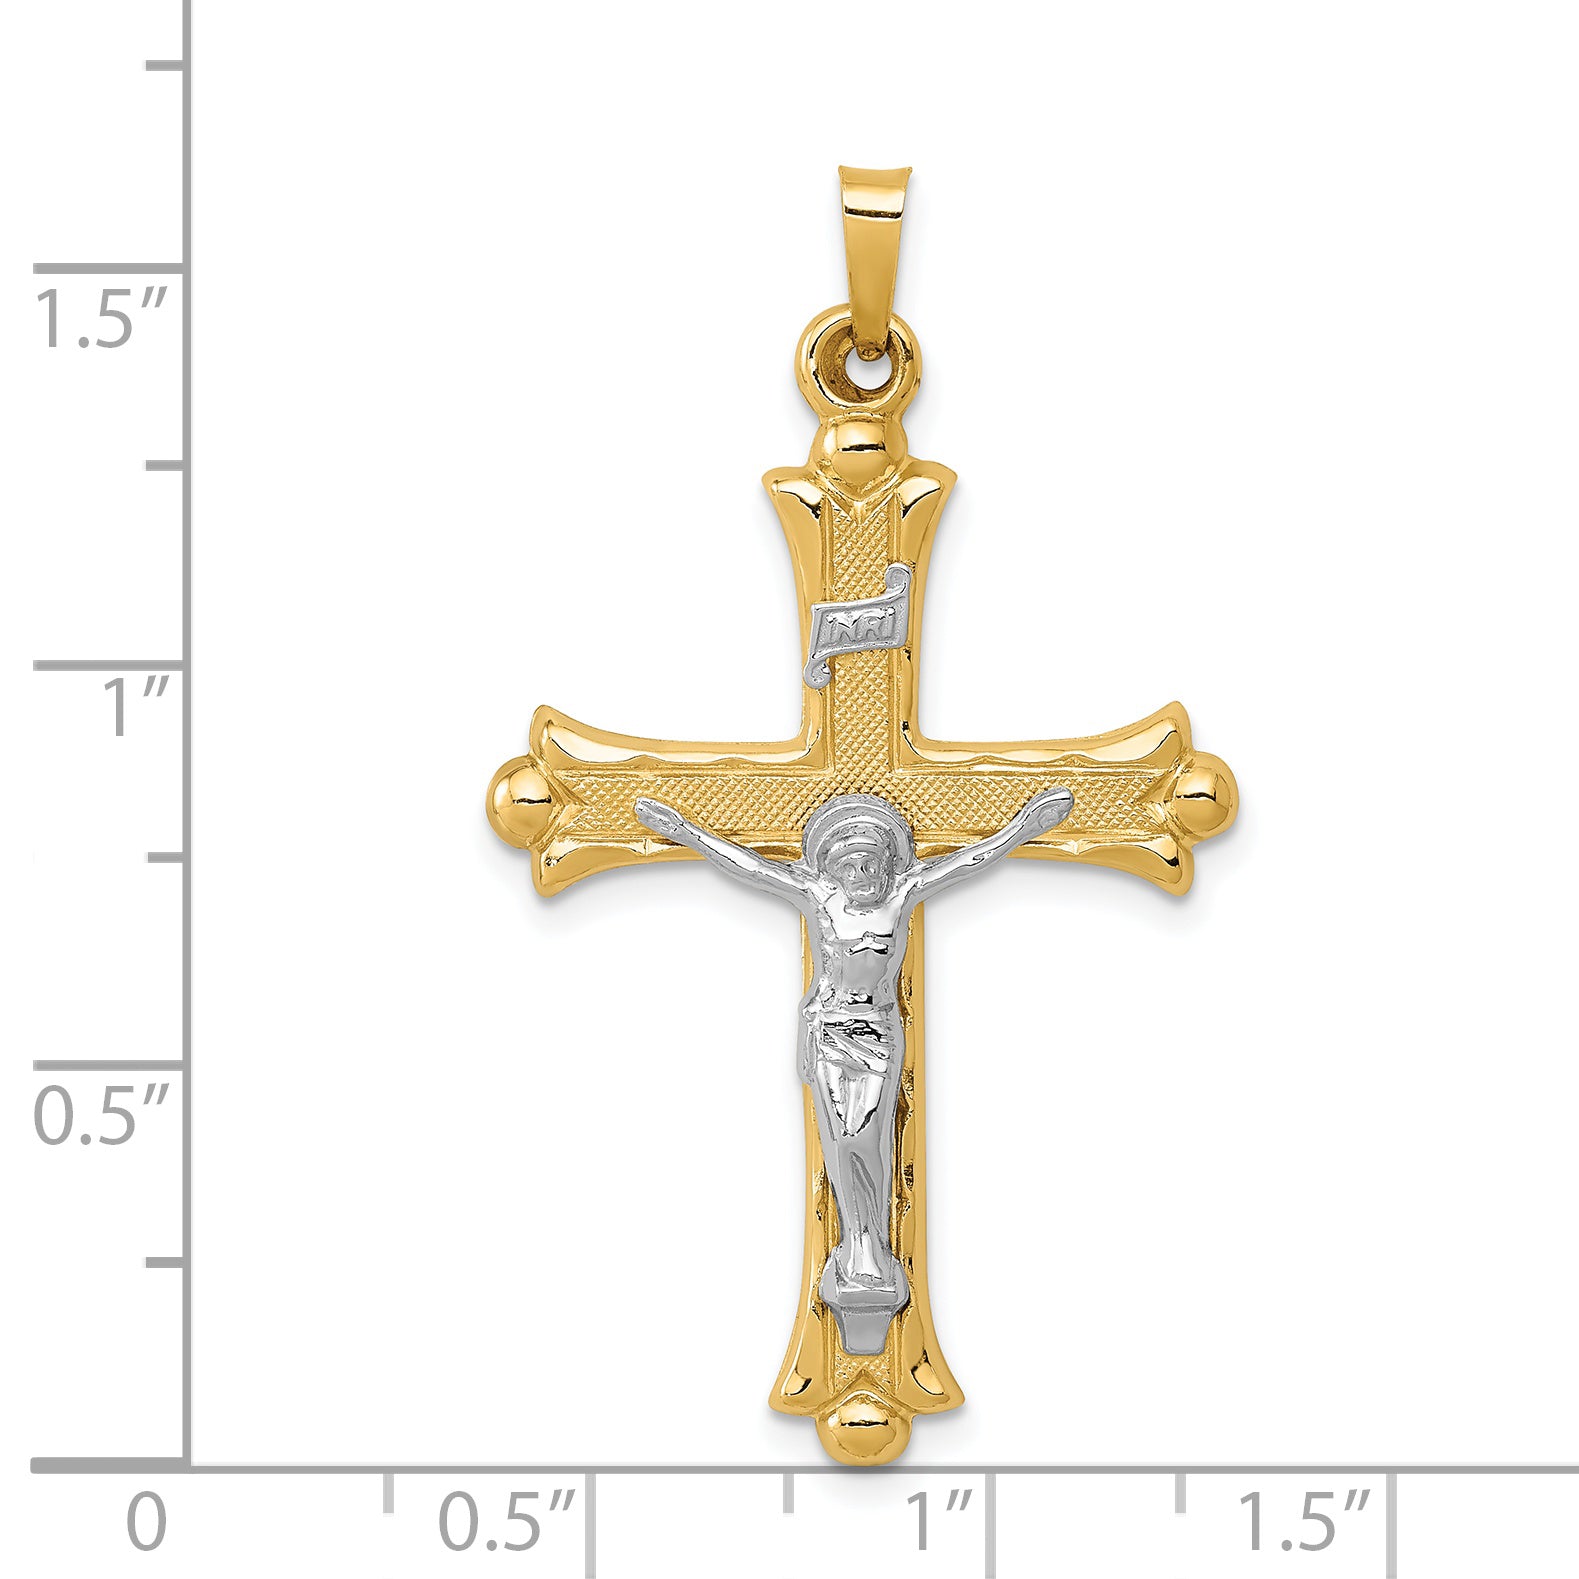 14K Two-Tone Textured and Polished INRI Crucifix Pendant